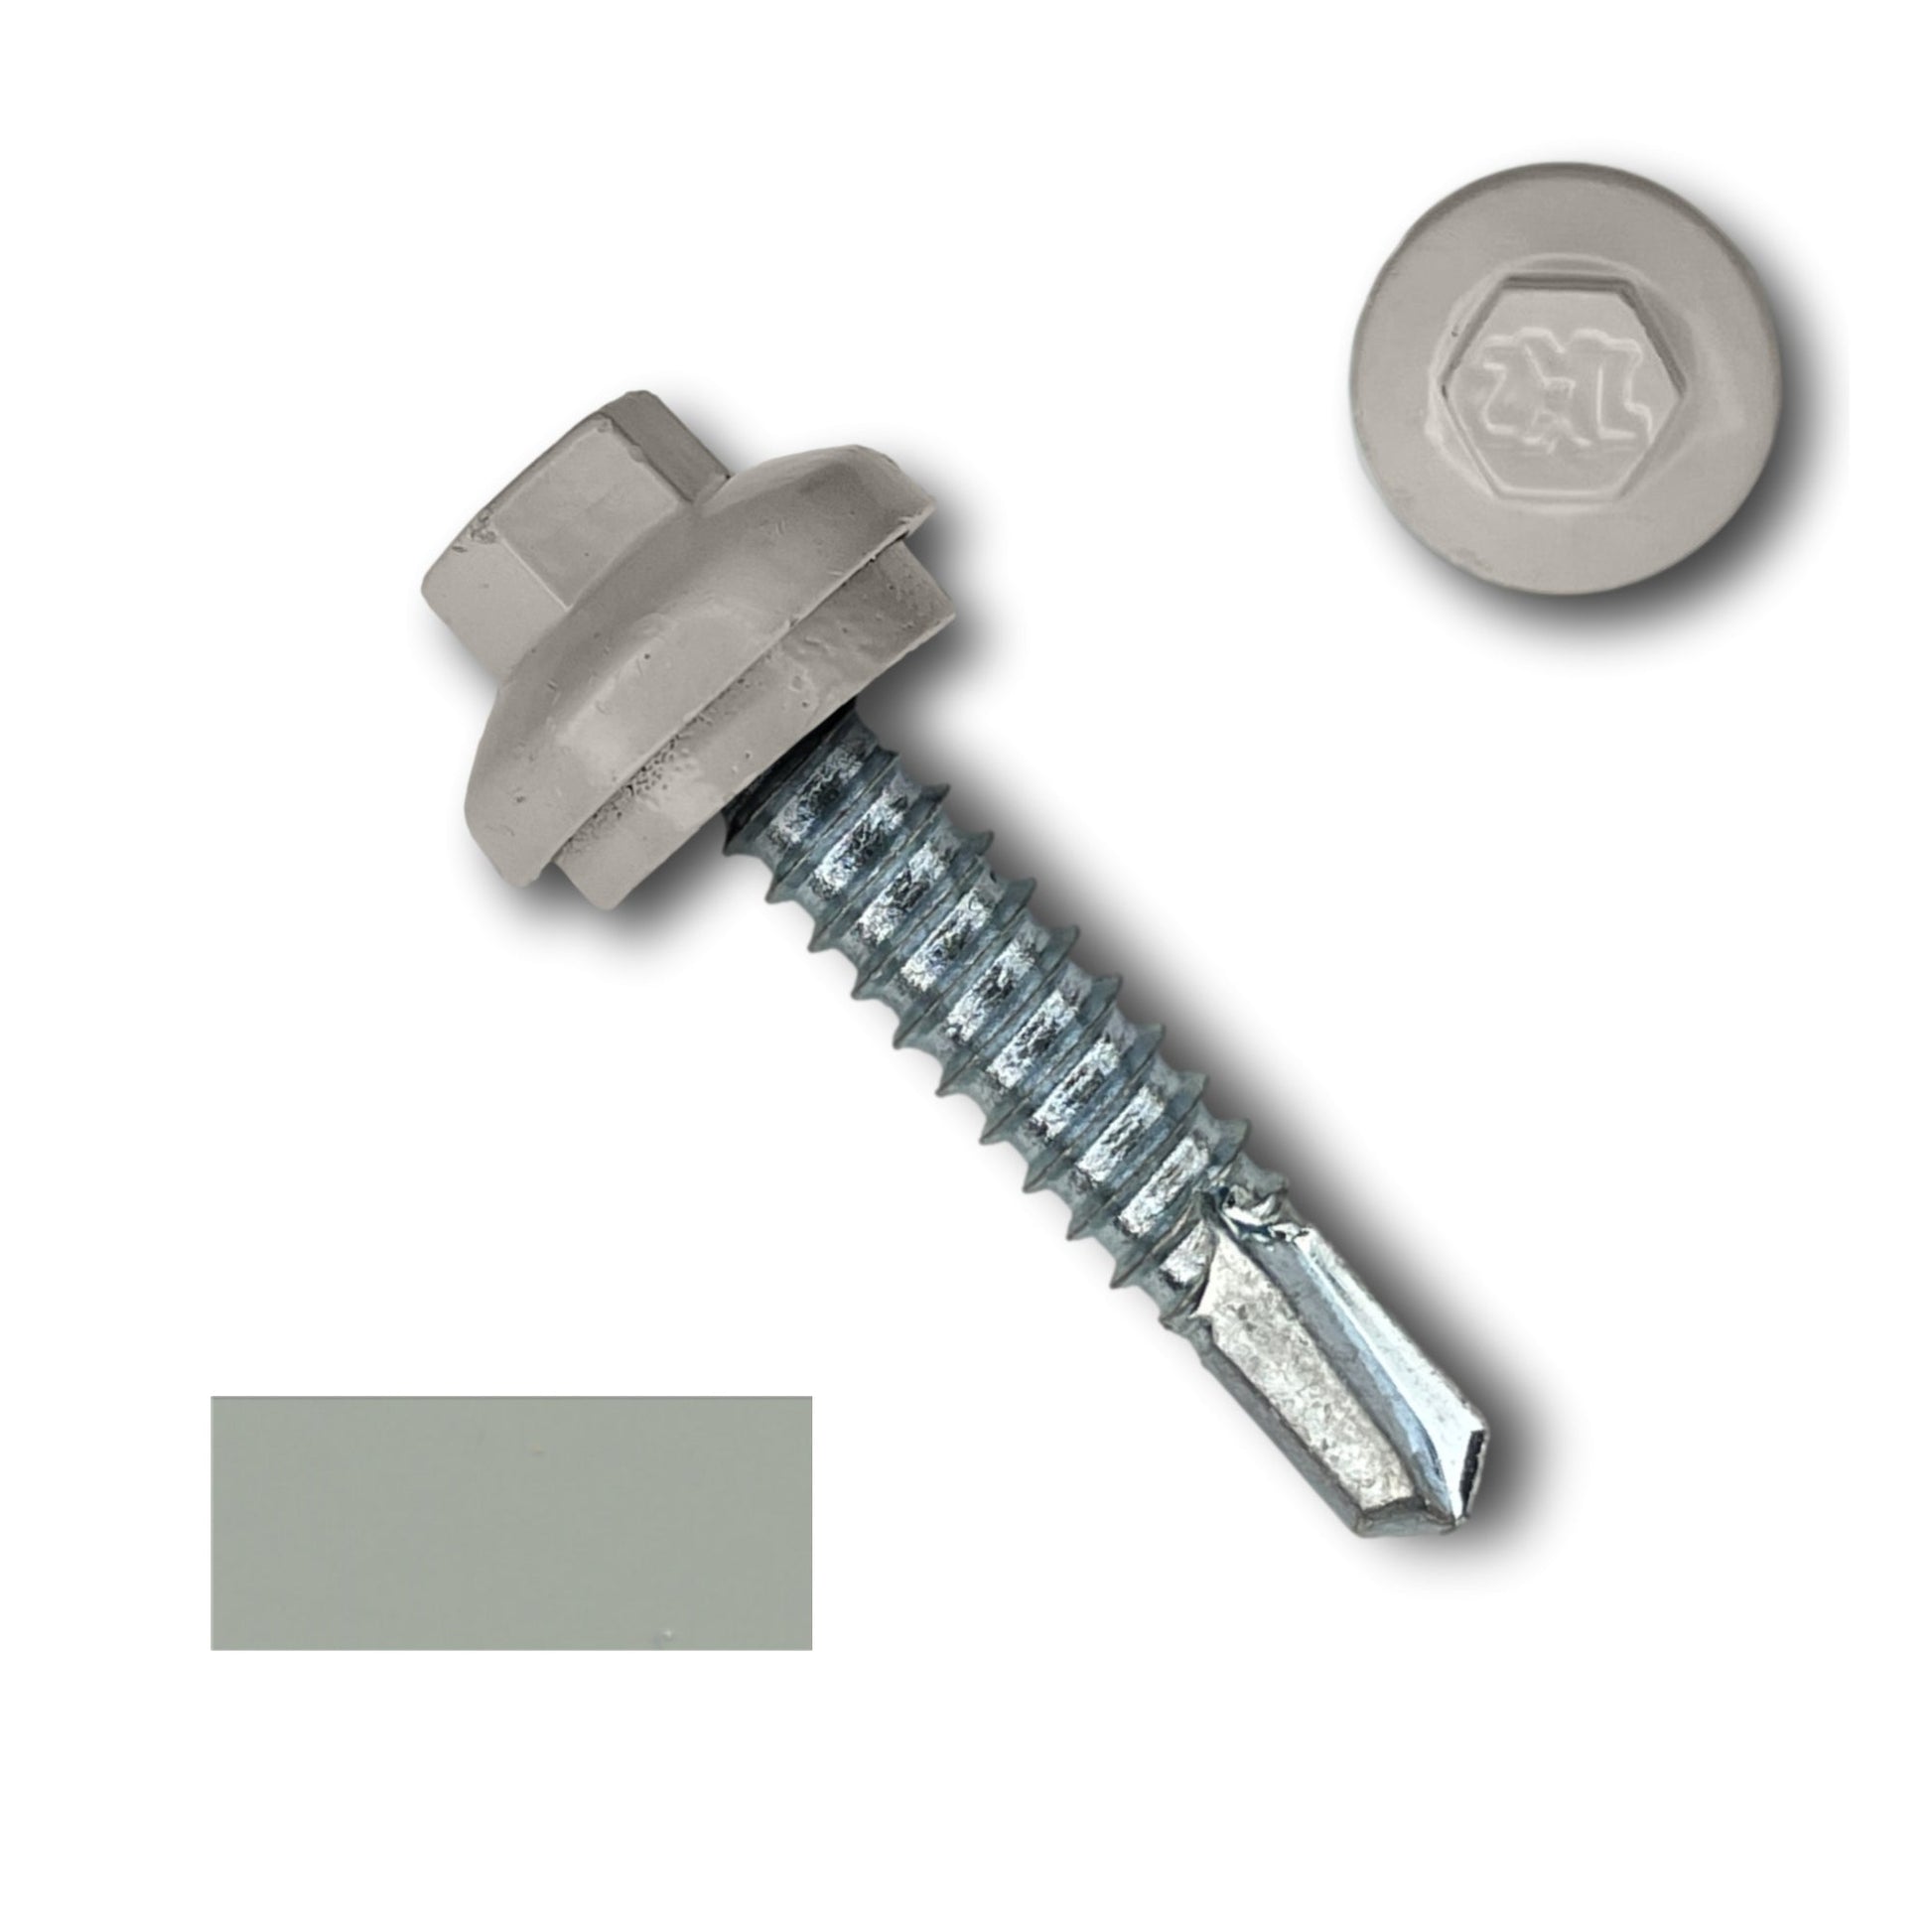 A Perma Cover #14 x 1.25" ZXL Dome Cap Metal Building Screw (Metal-to-Metal), Self-Drilling - 250, 500, or 1000 Pack featuring a rubber washer, a sharp pointed tip, and threading along the shaft. The screw is positioned next to a separate image showing a top-down view of the hex head. A swatch of grey color is displayed in the image corner.